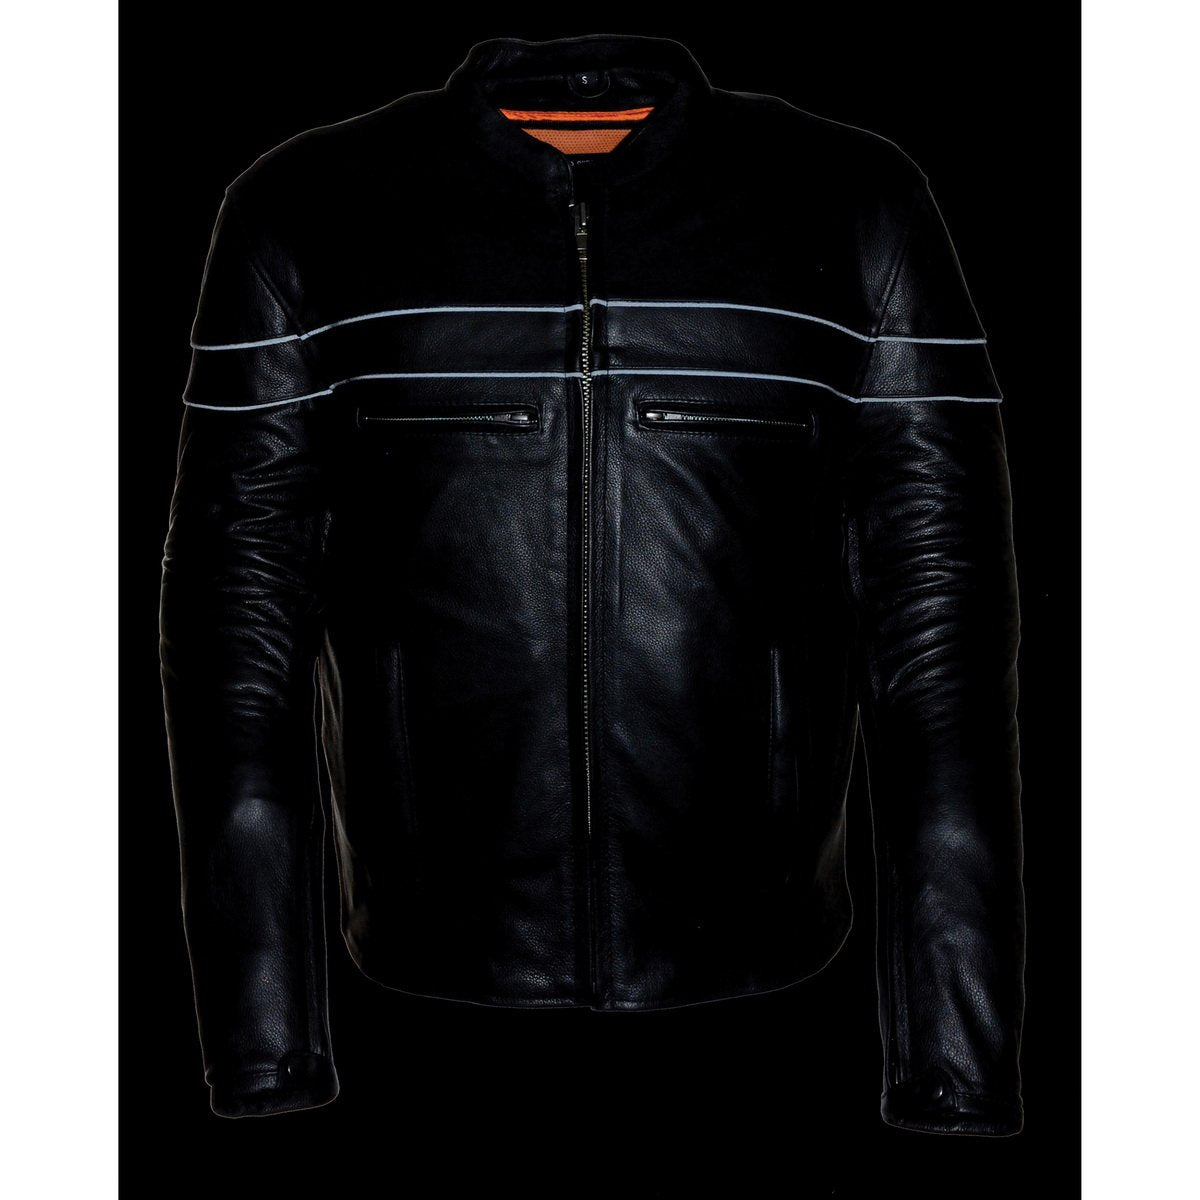 Milwaukee Leather ML1408 Men's Black Sporty Crossover Leather Jacket with Gun Pocket - Milwaukee Leather Mens Leather Jackets